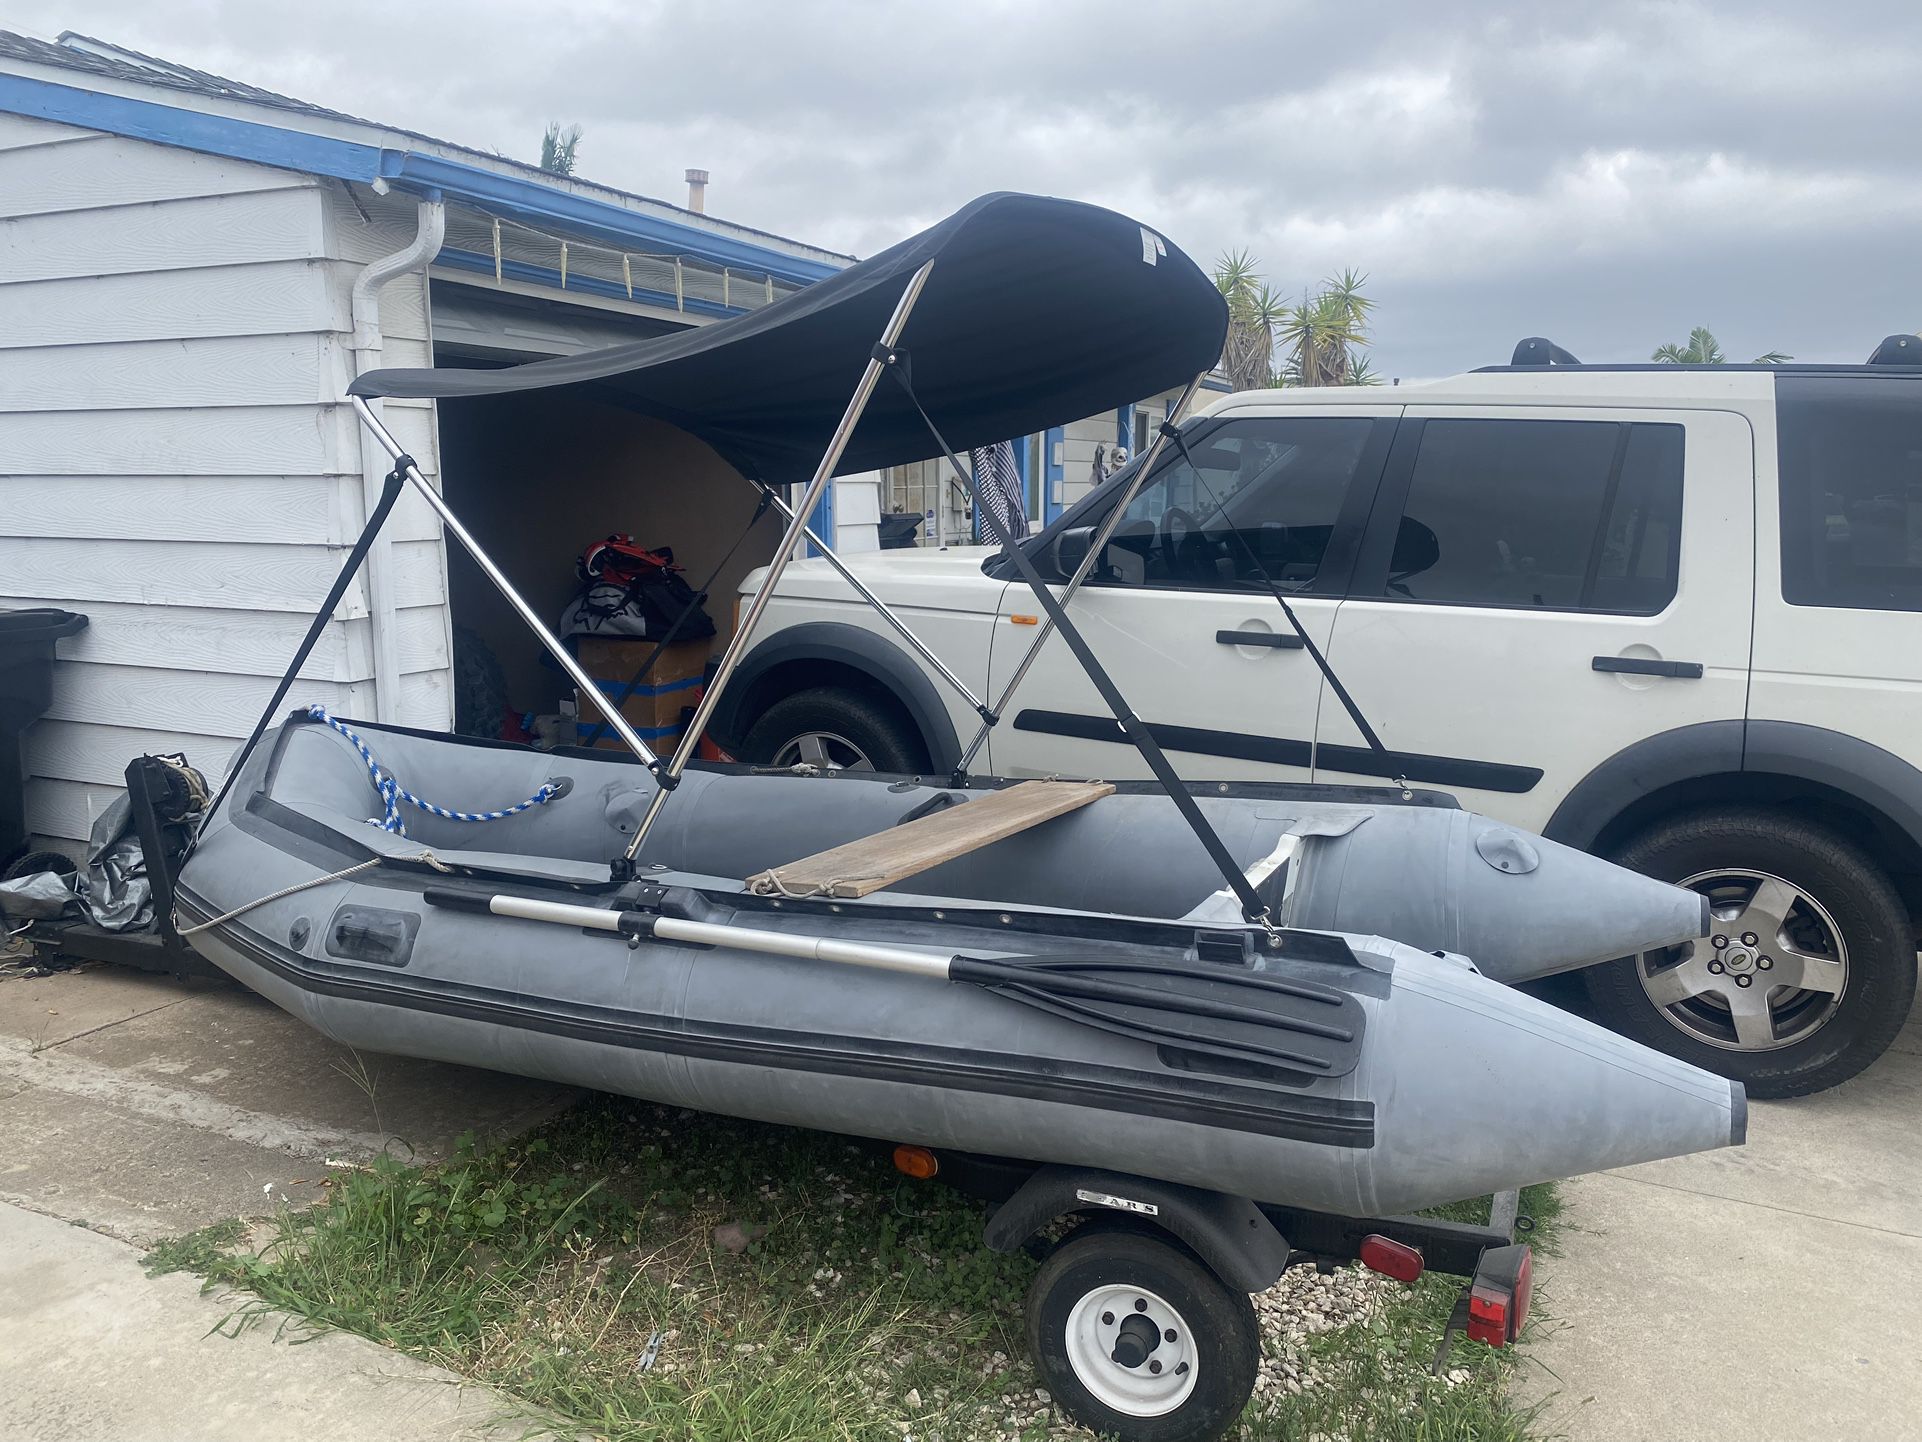 12 Ft Inflatable Boat With Trailer And Bimini Top